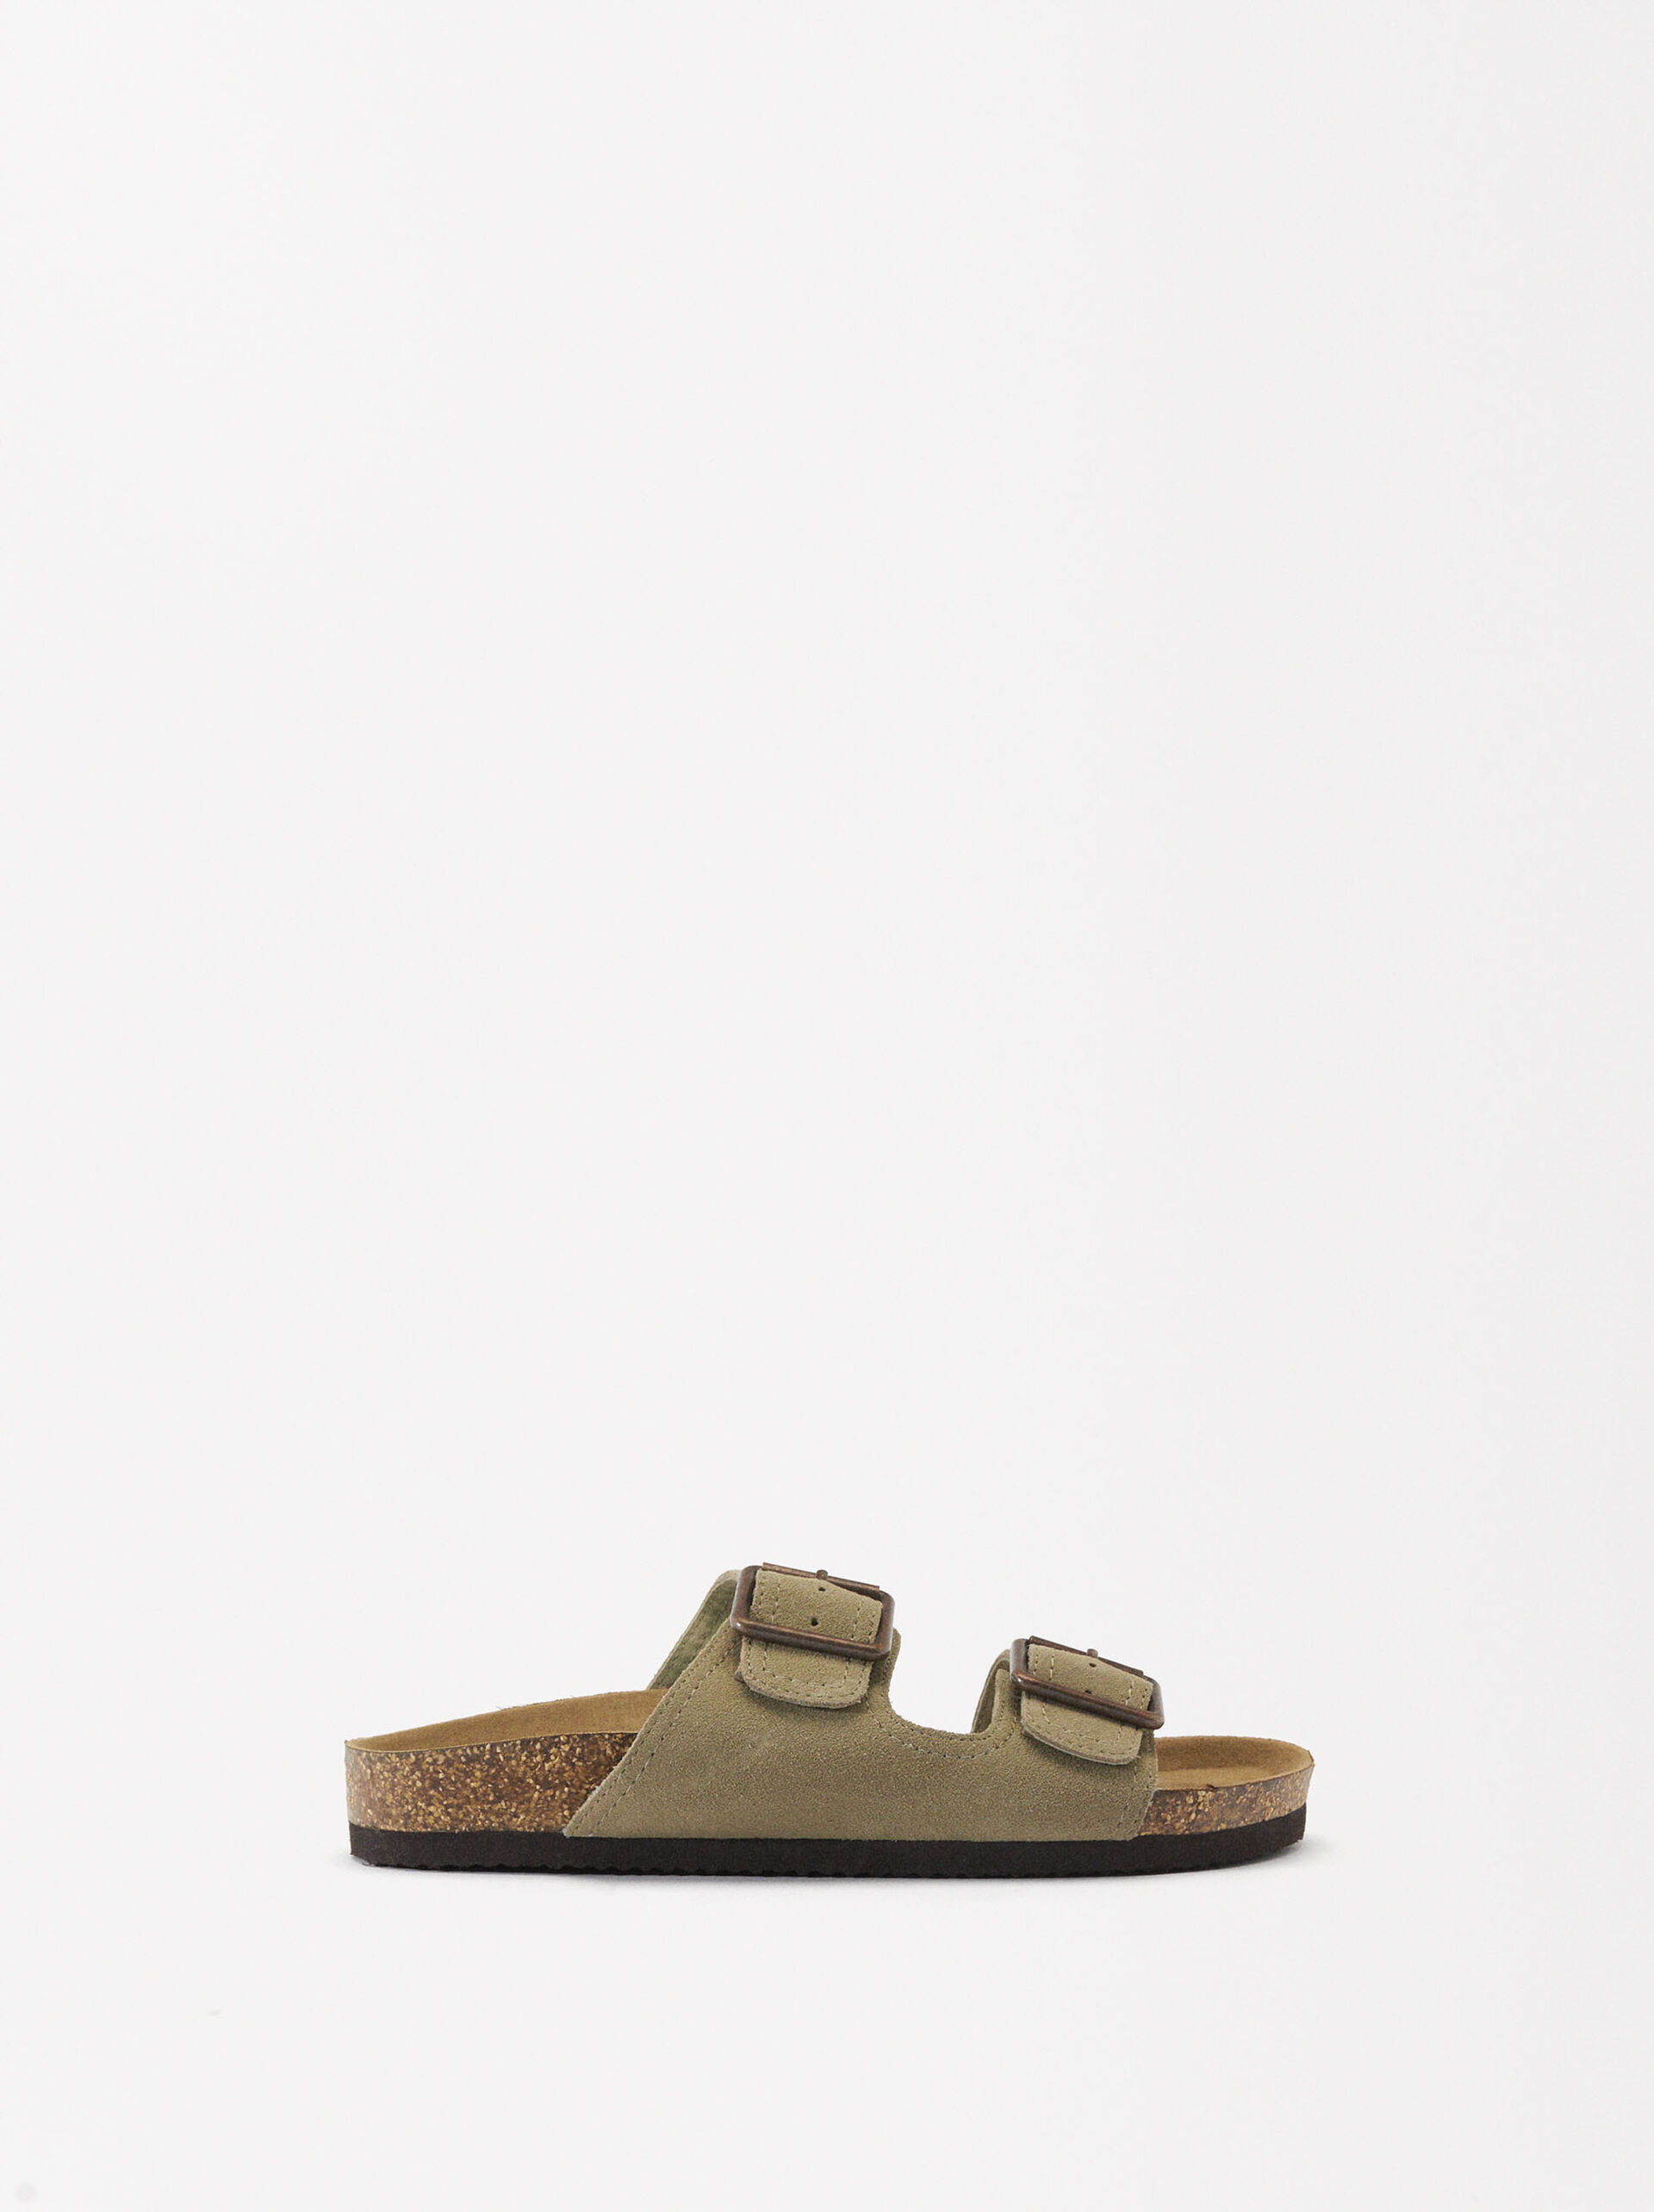 Sandals With Leather Buckles image number 2.0